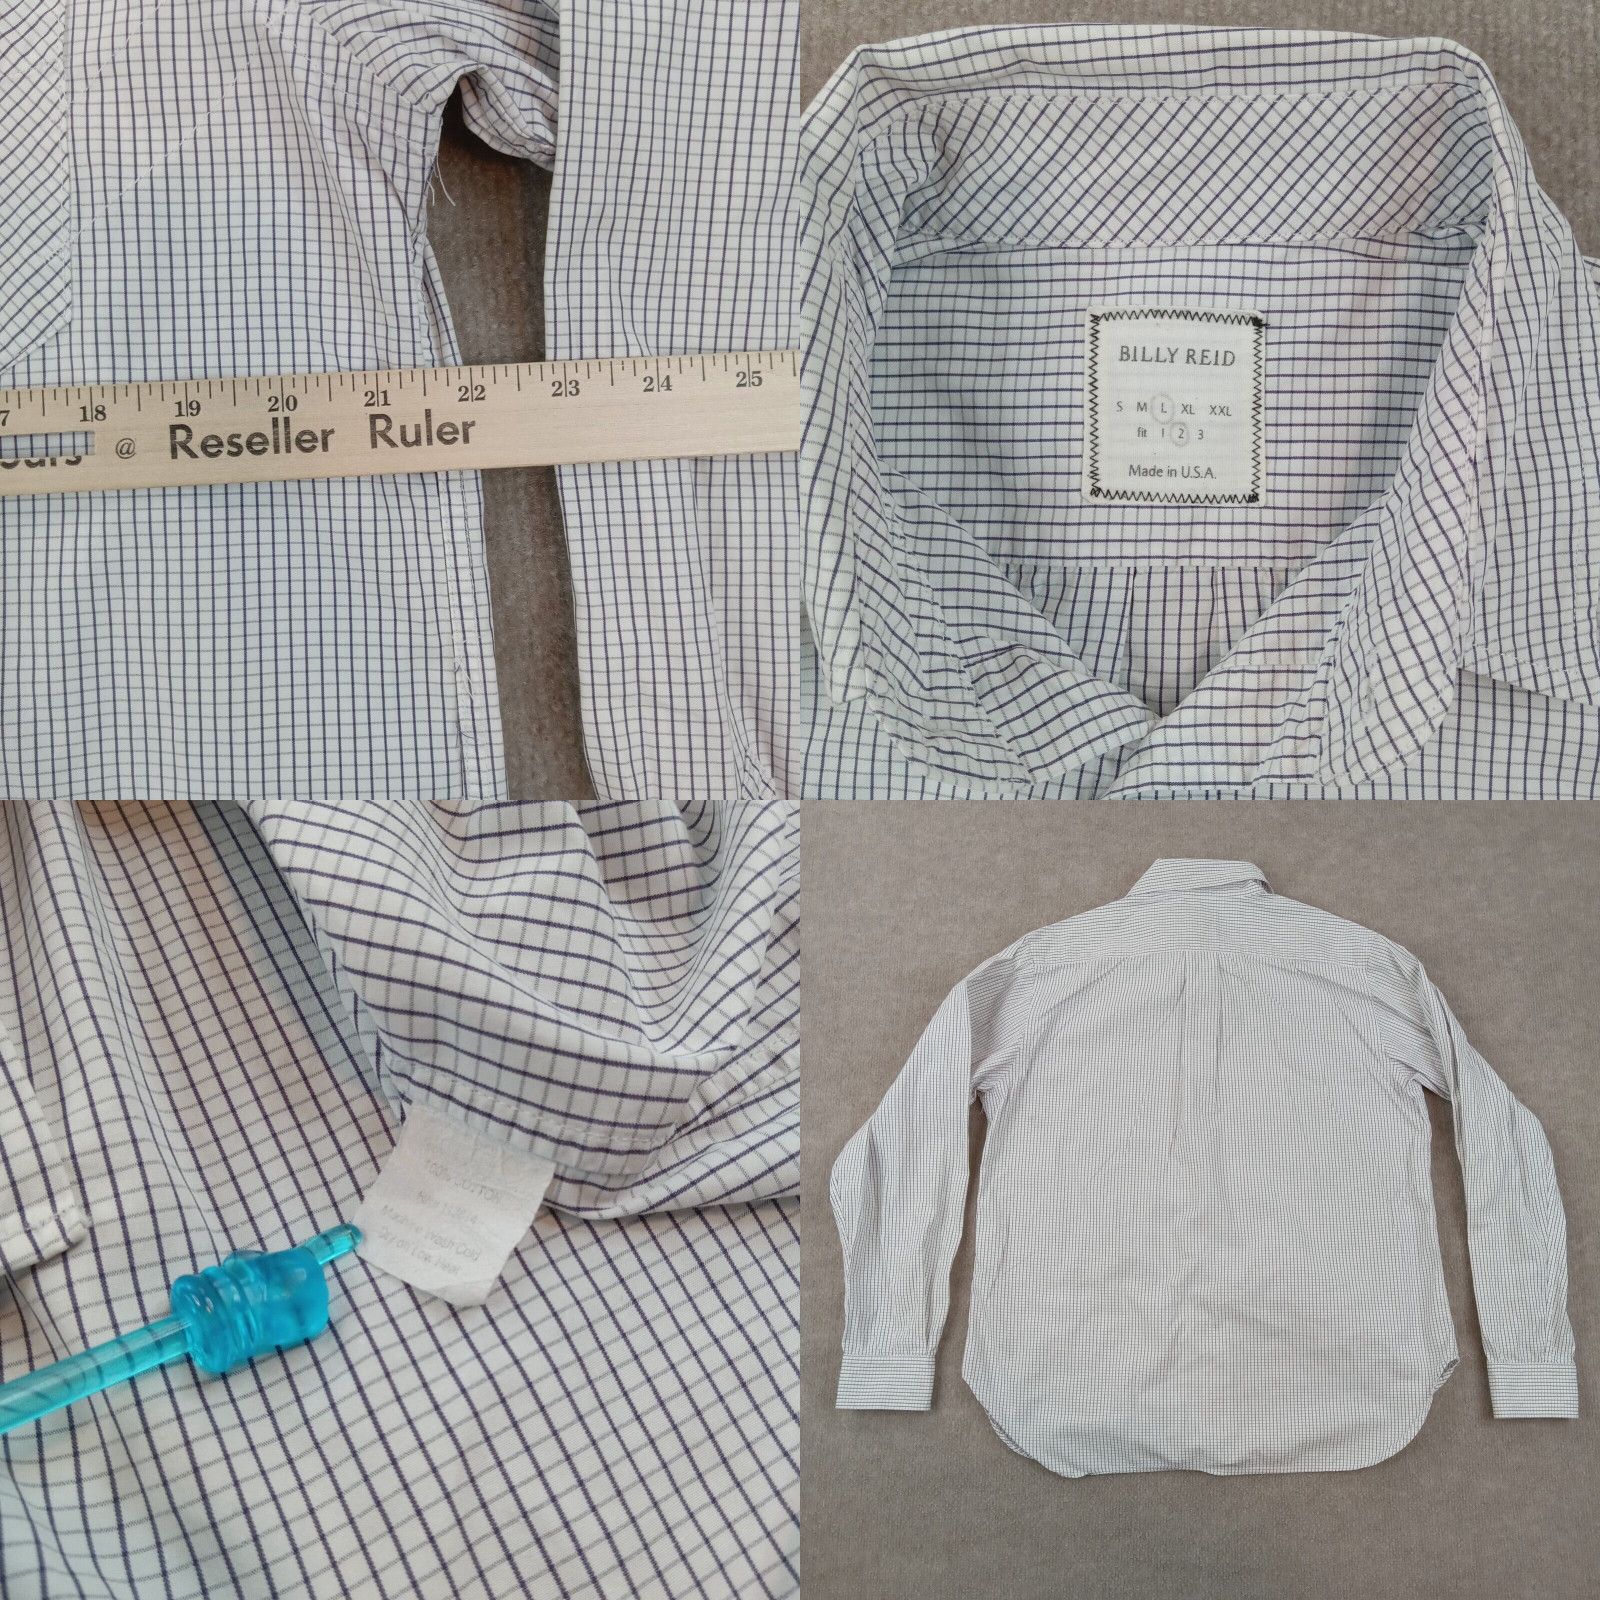 Billy Reid Billy Reid Shirt Mens Large White Blue Check Long Sleeve Button Up Casual Size US L / EU 52-54 / 3 - 4 Preview